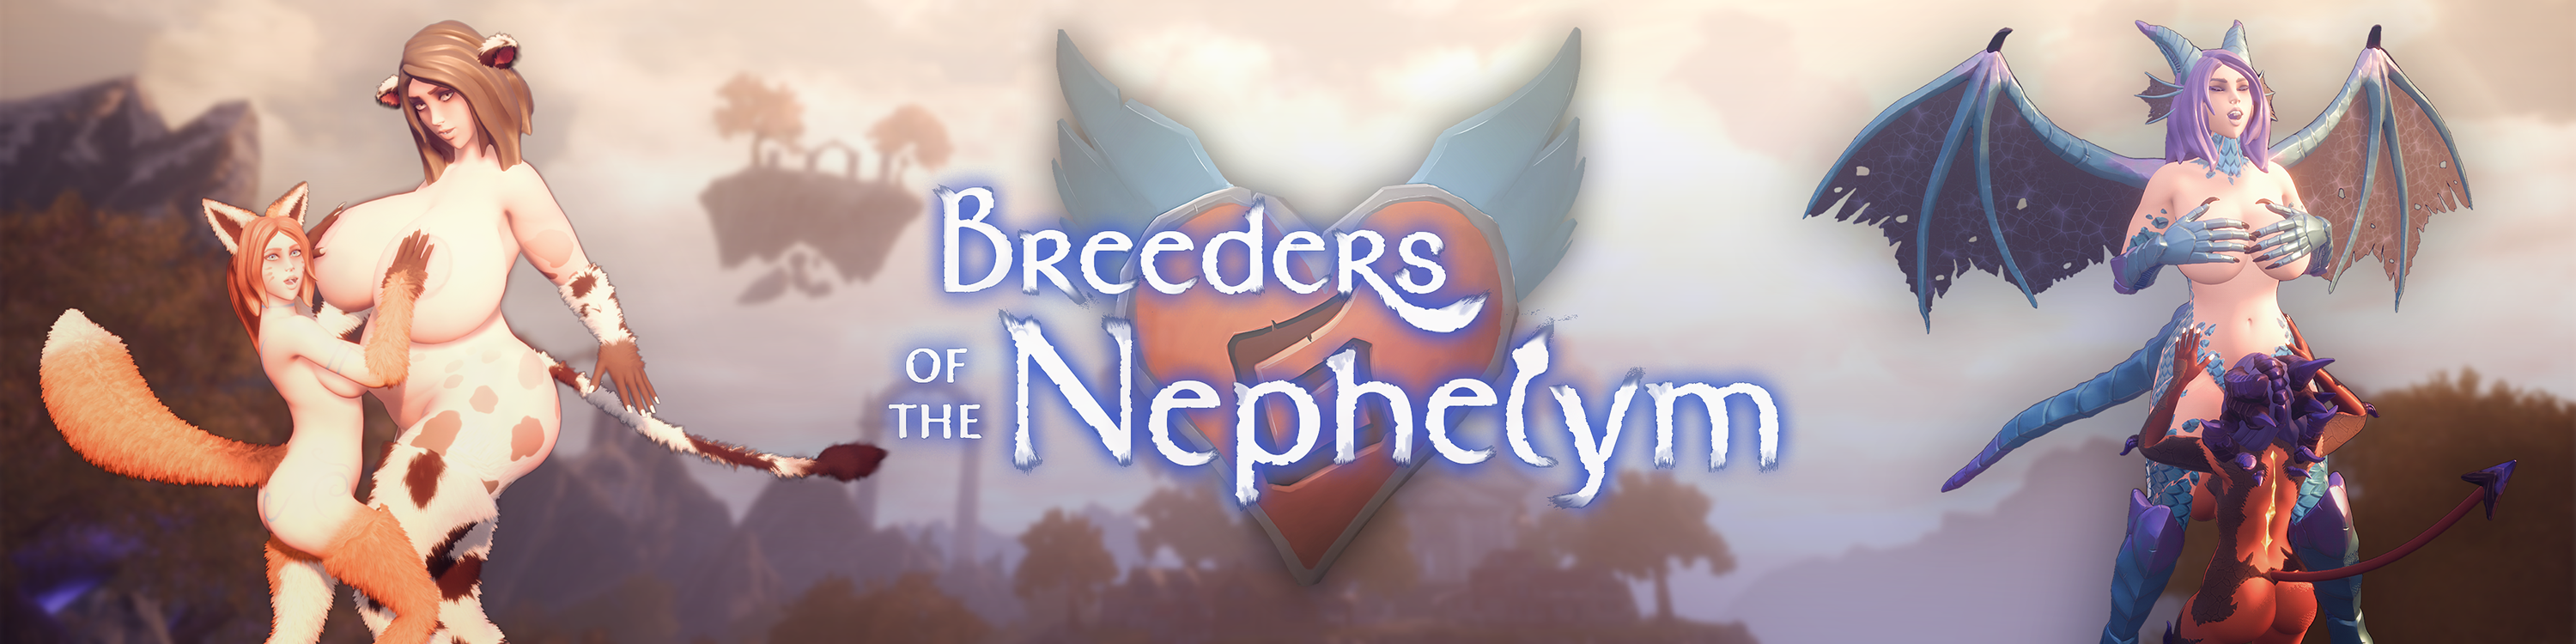 best of Breeders lets crazy play nephelym